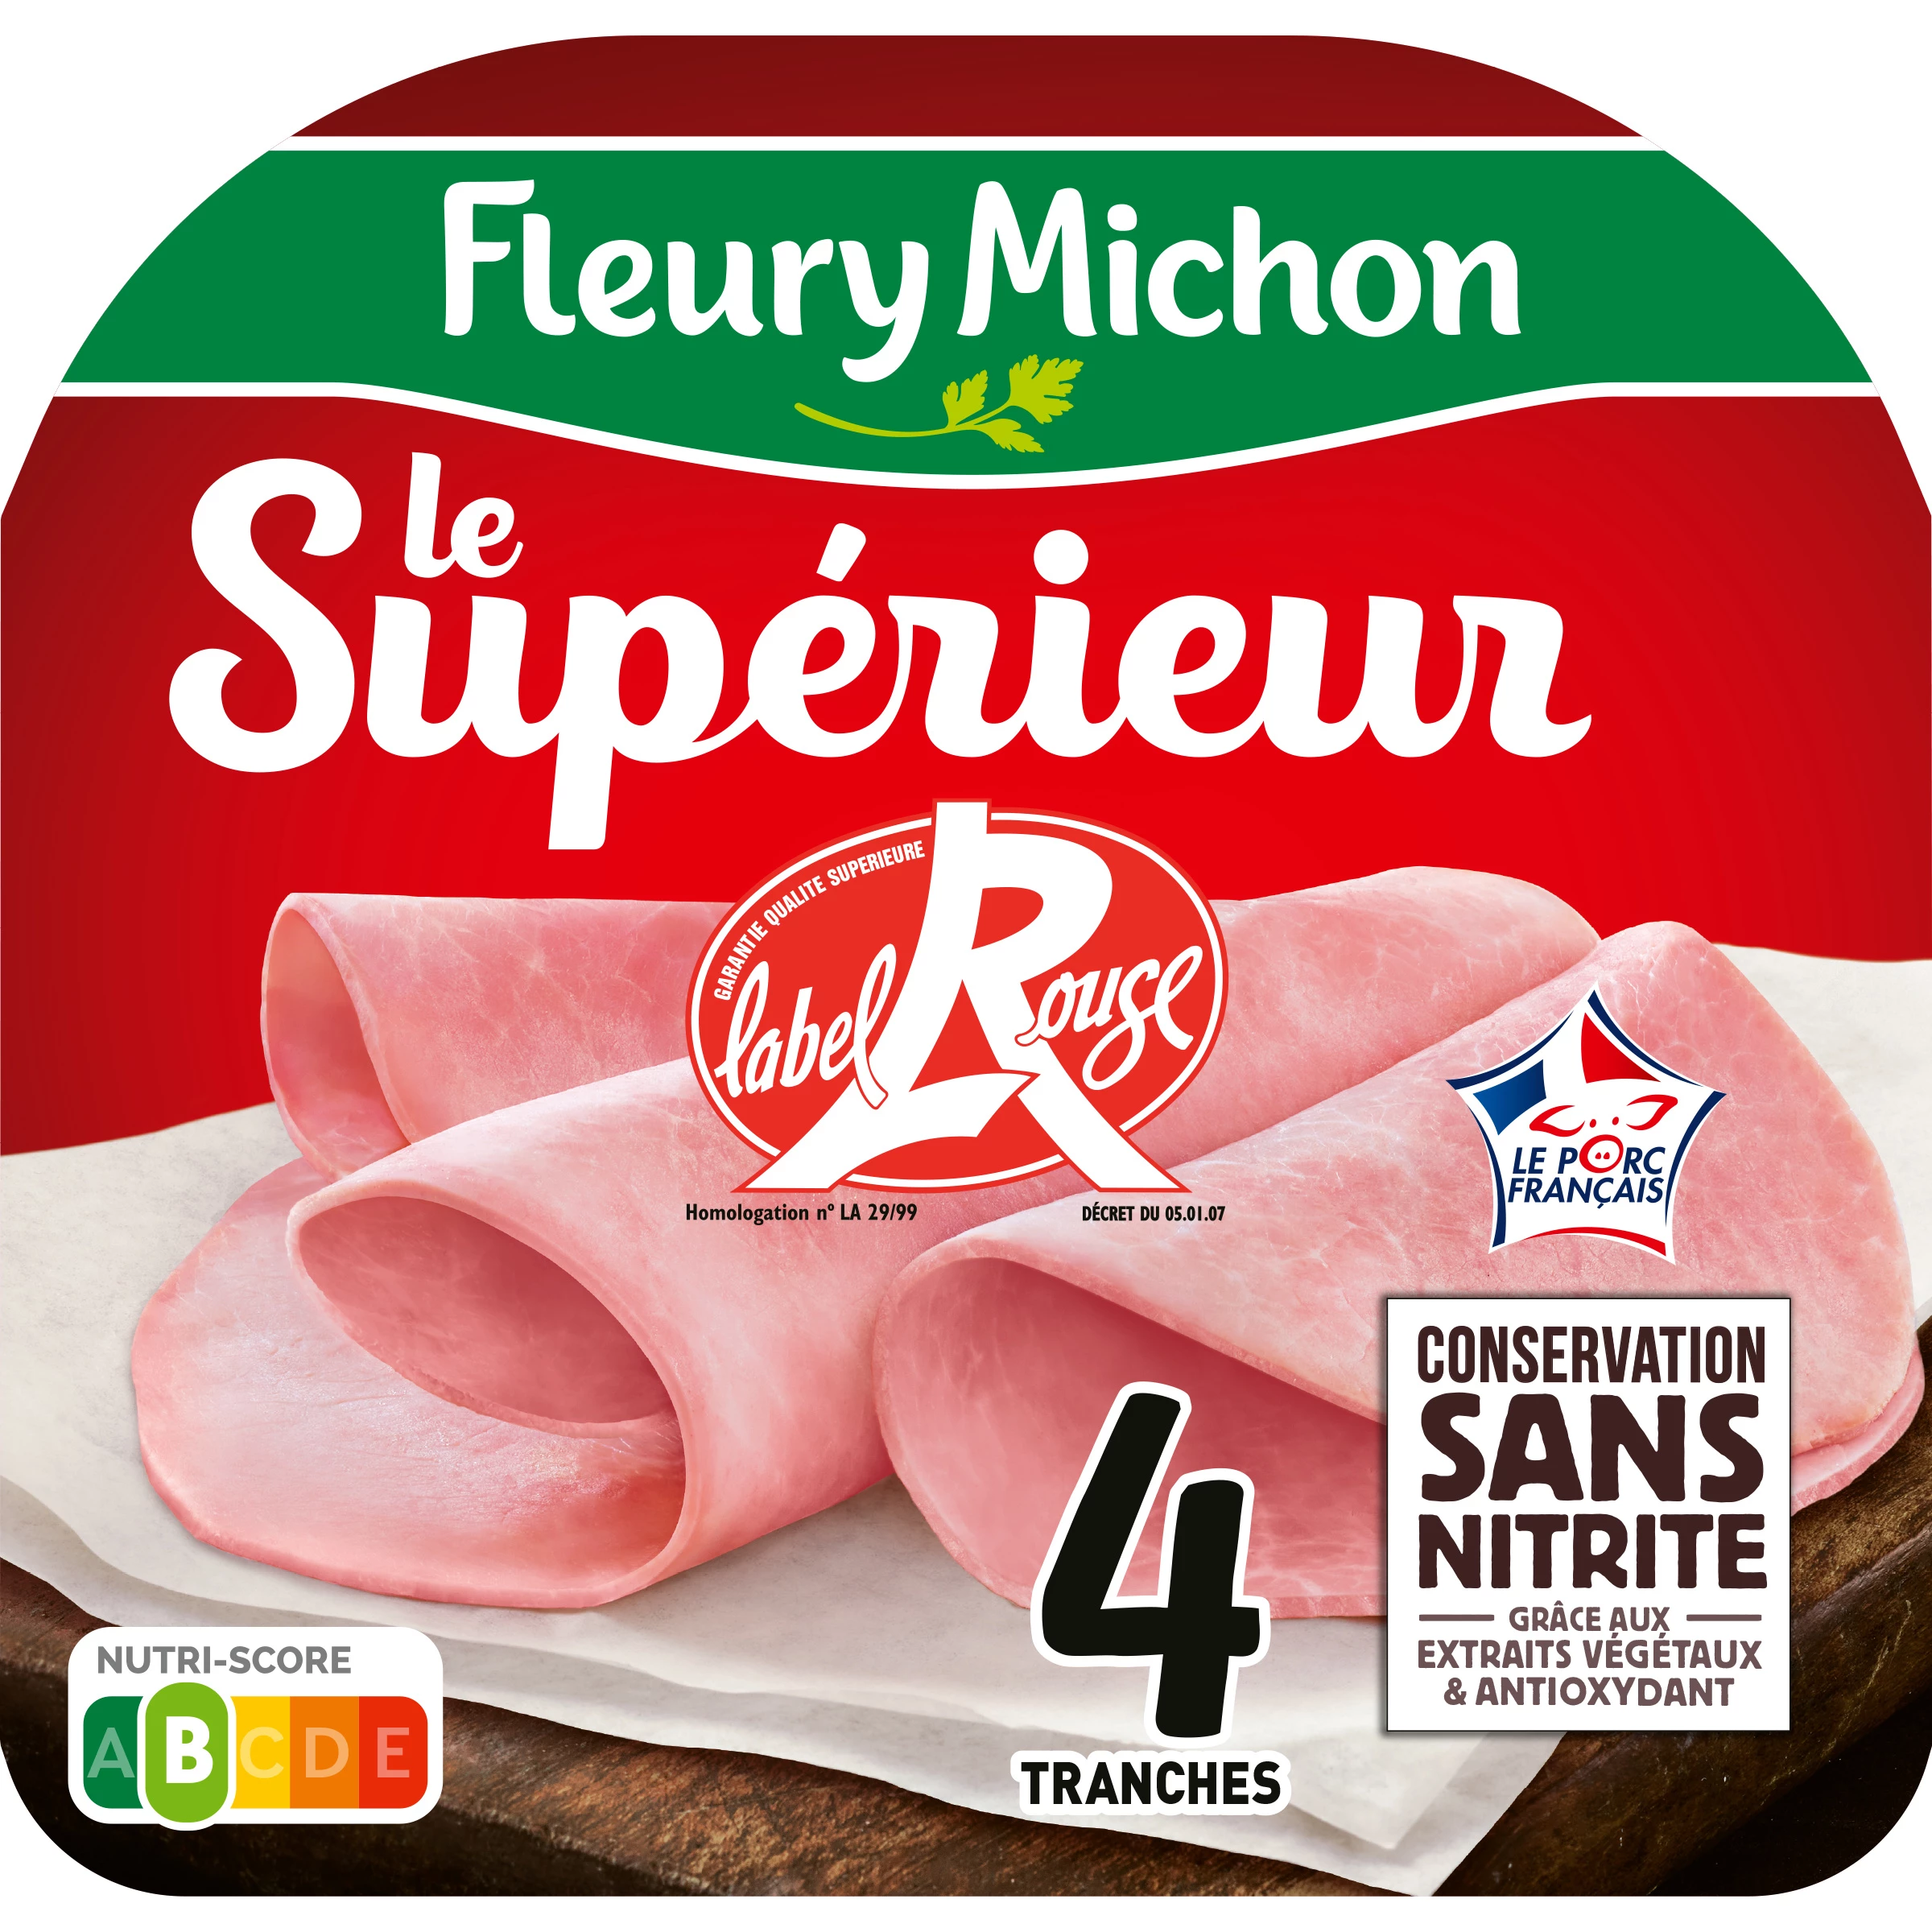 Label Rouge white ham preserved without nitrite - FLEURY MICHON